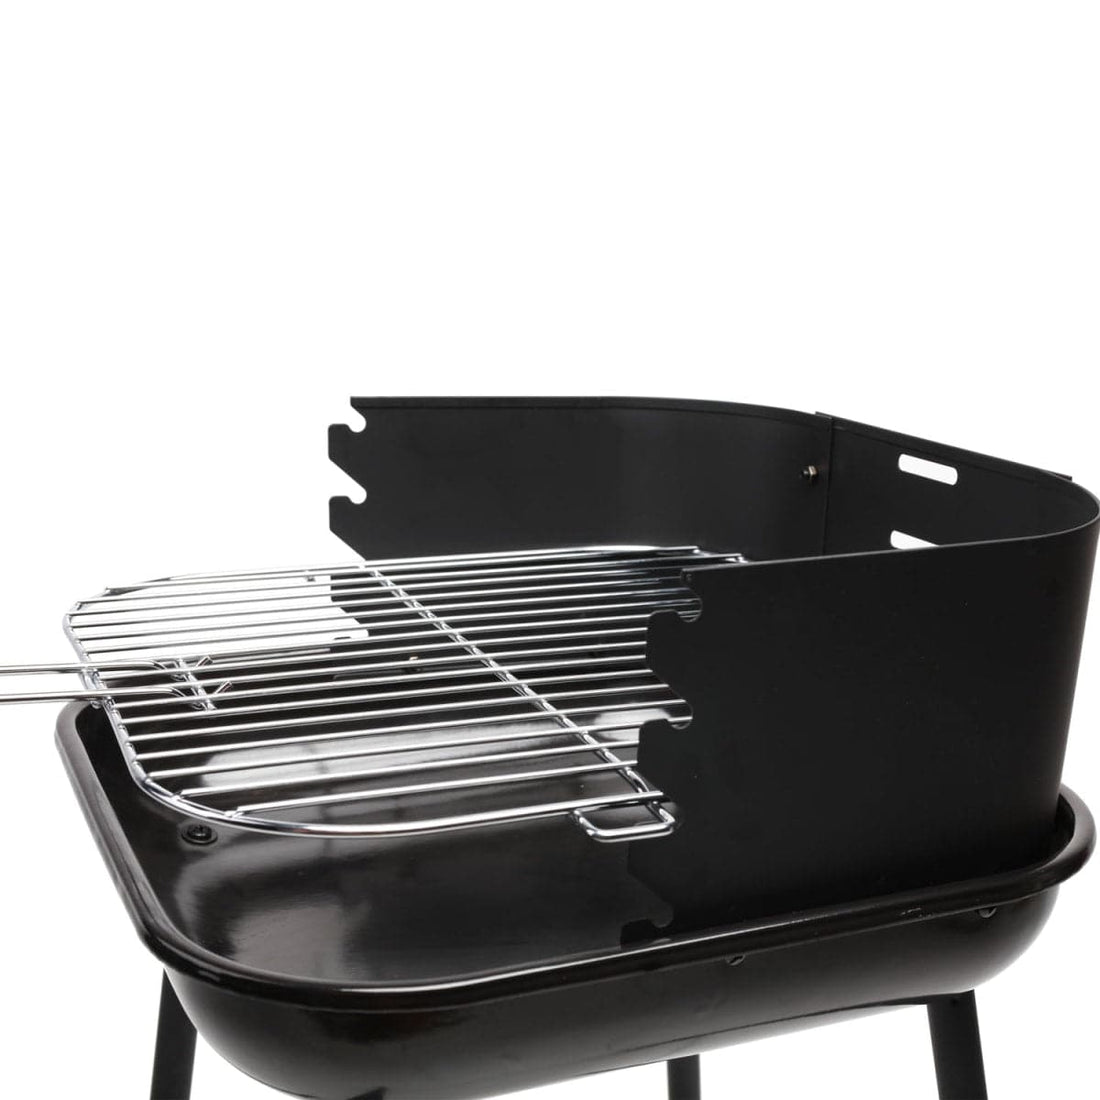 CROIX CHARCOAL BARBECUE - best price from Maltashopper.com BR500009614